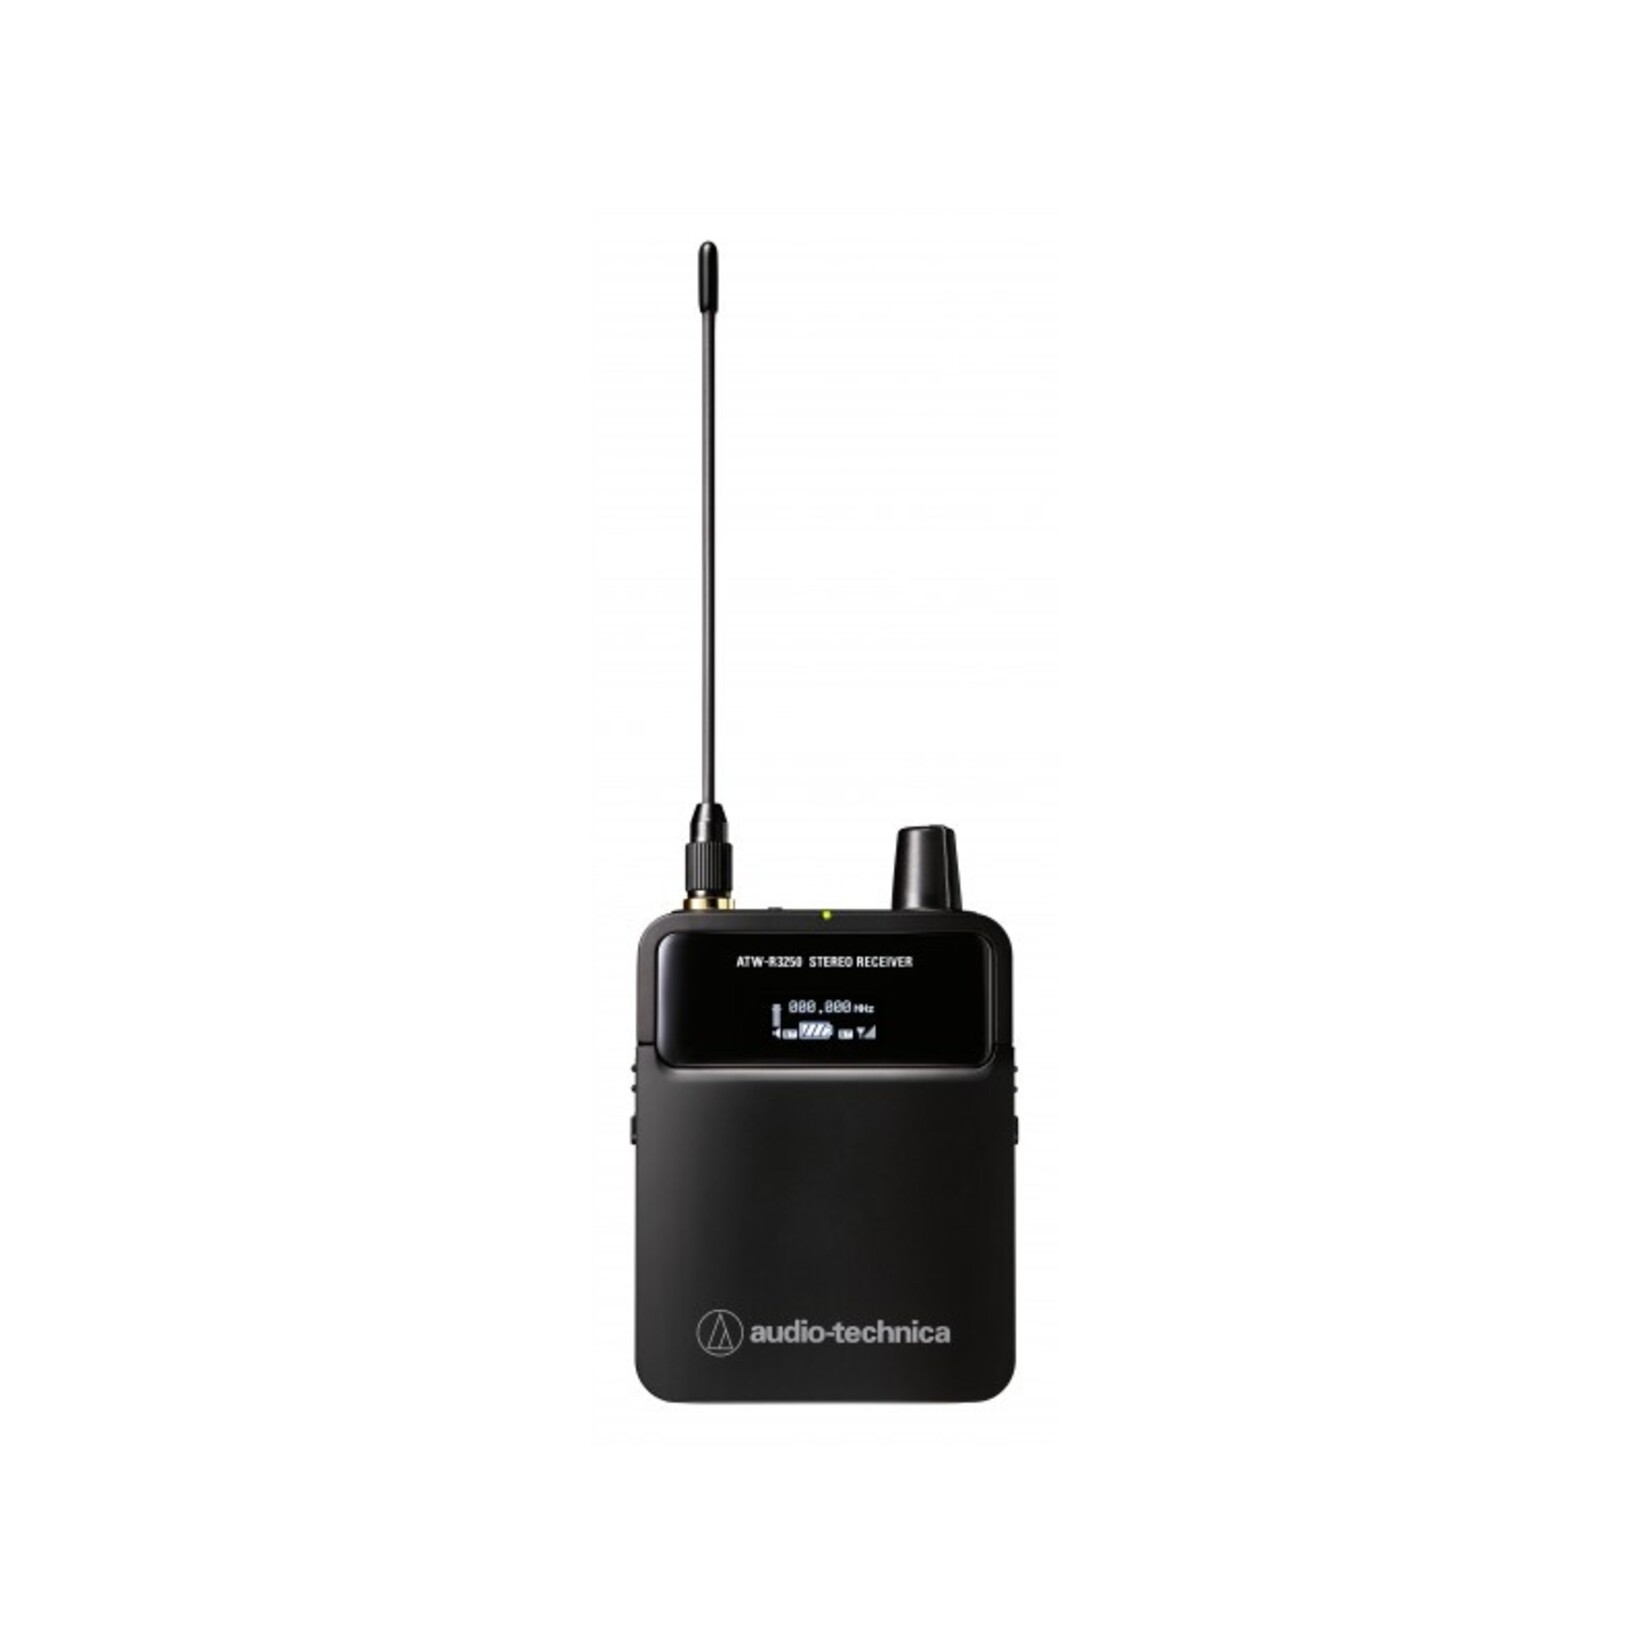 Audio-Technica ATW-3255 In-Ear Monitor System 470-608 MHz